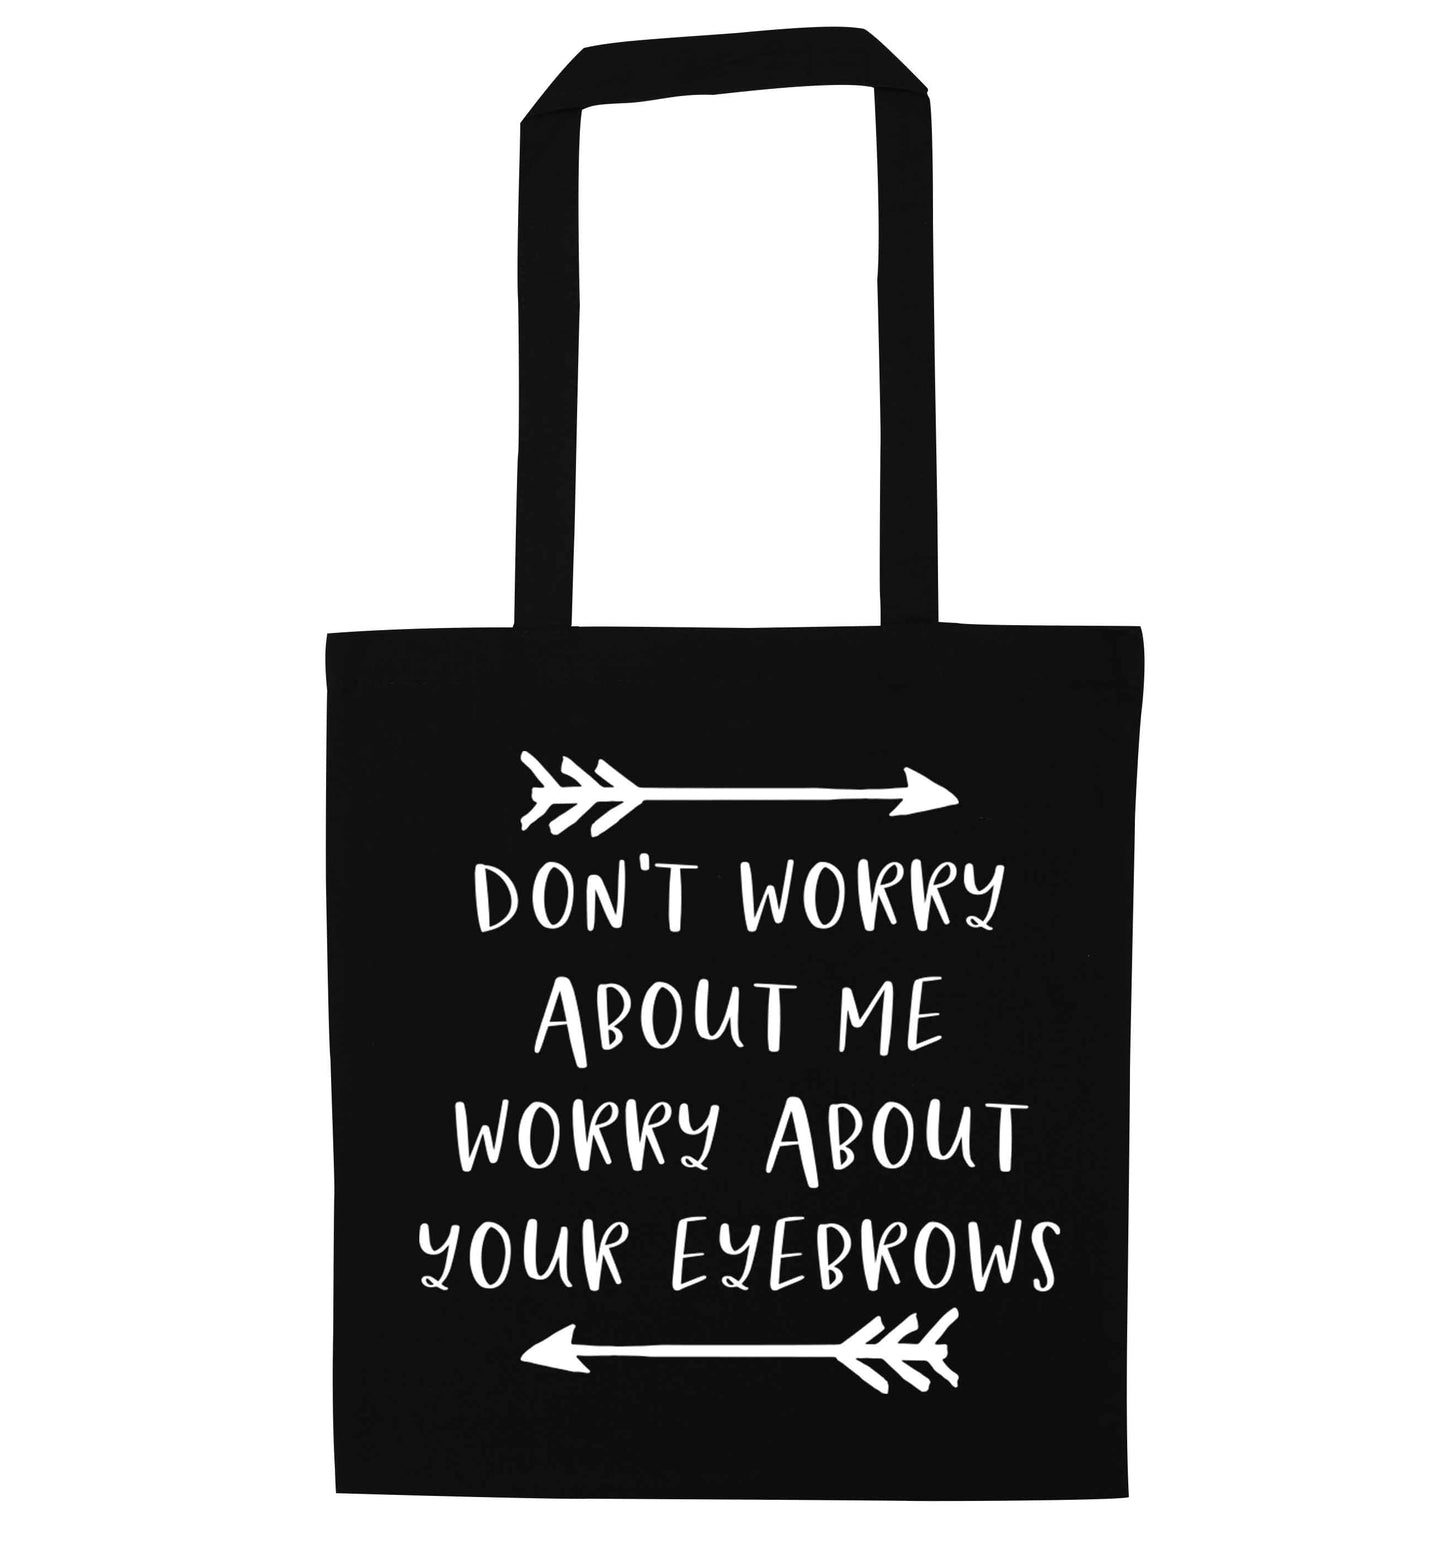 Don't worry about me worry about your eyebrows black tote bag